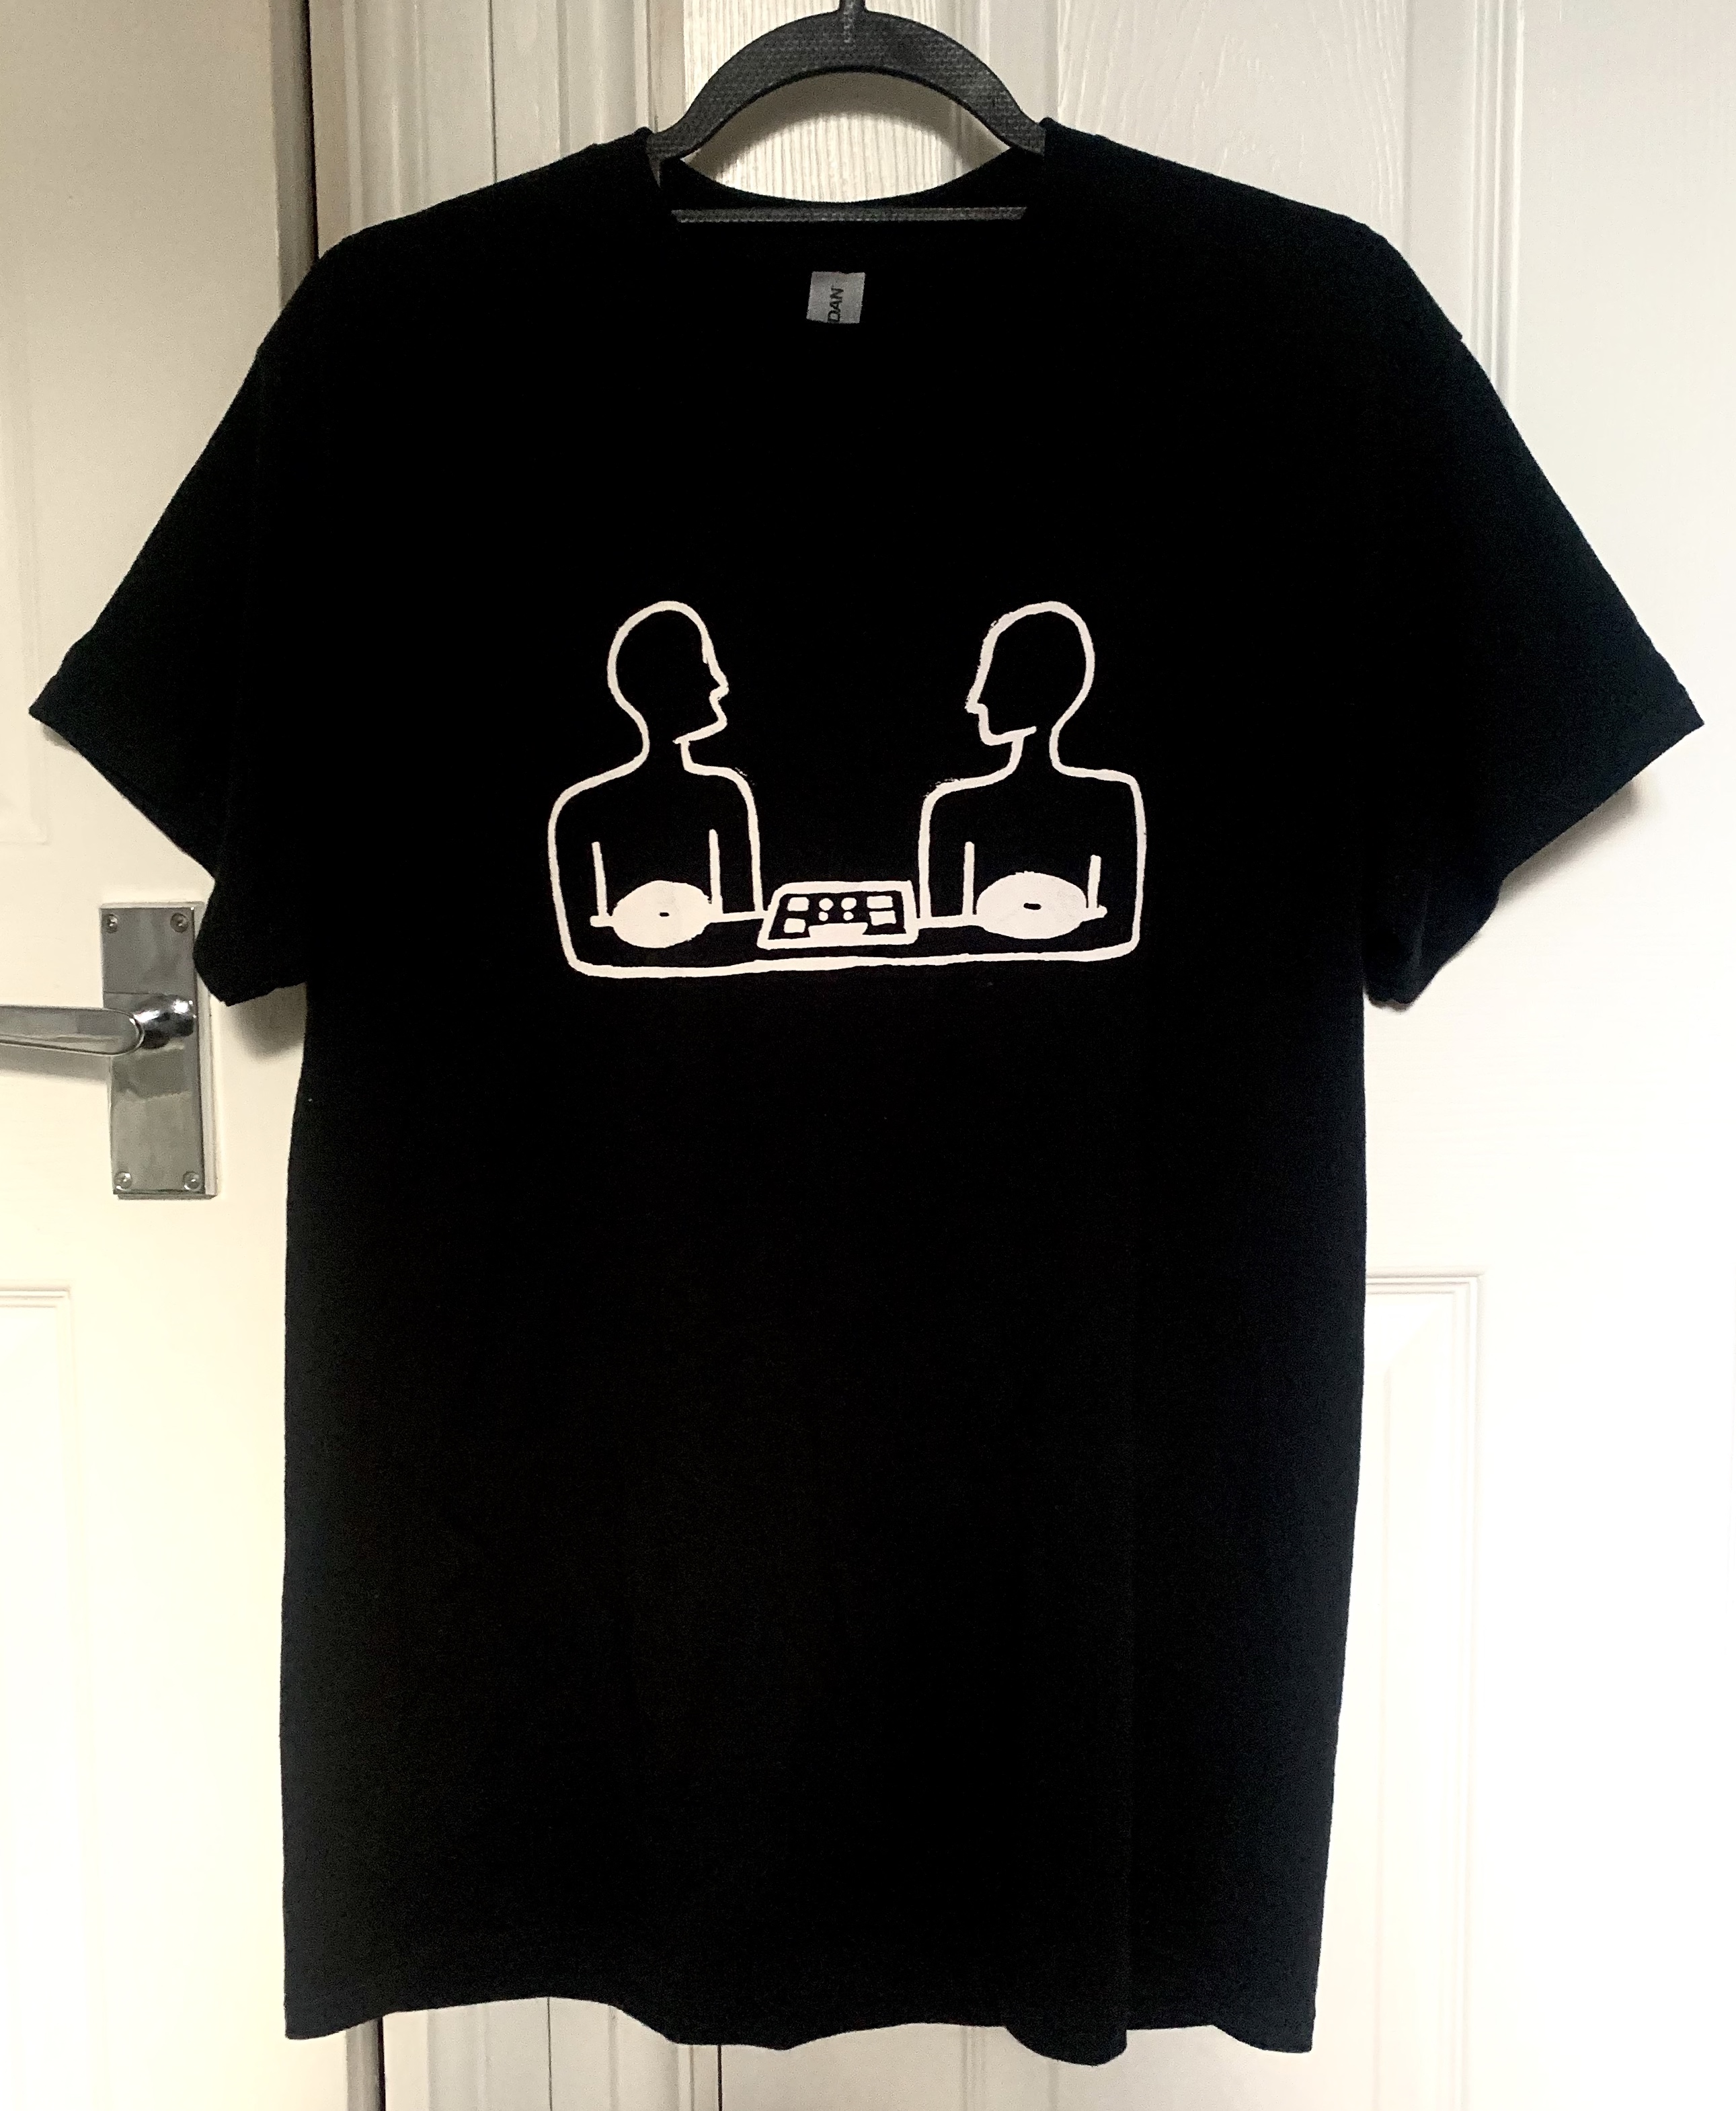 Photo of the EFS T-Shirt, a black t-shirt with a white line drawing graphic of two people sitting beside a mixing deck.